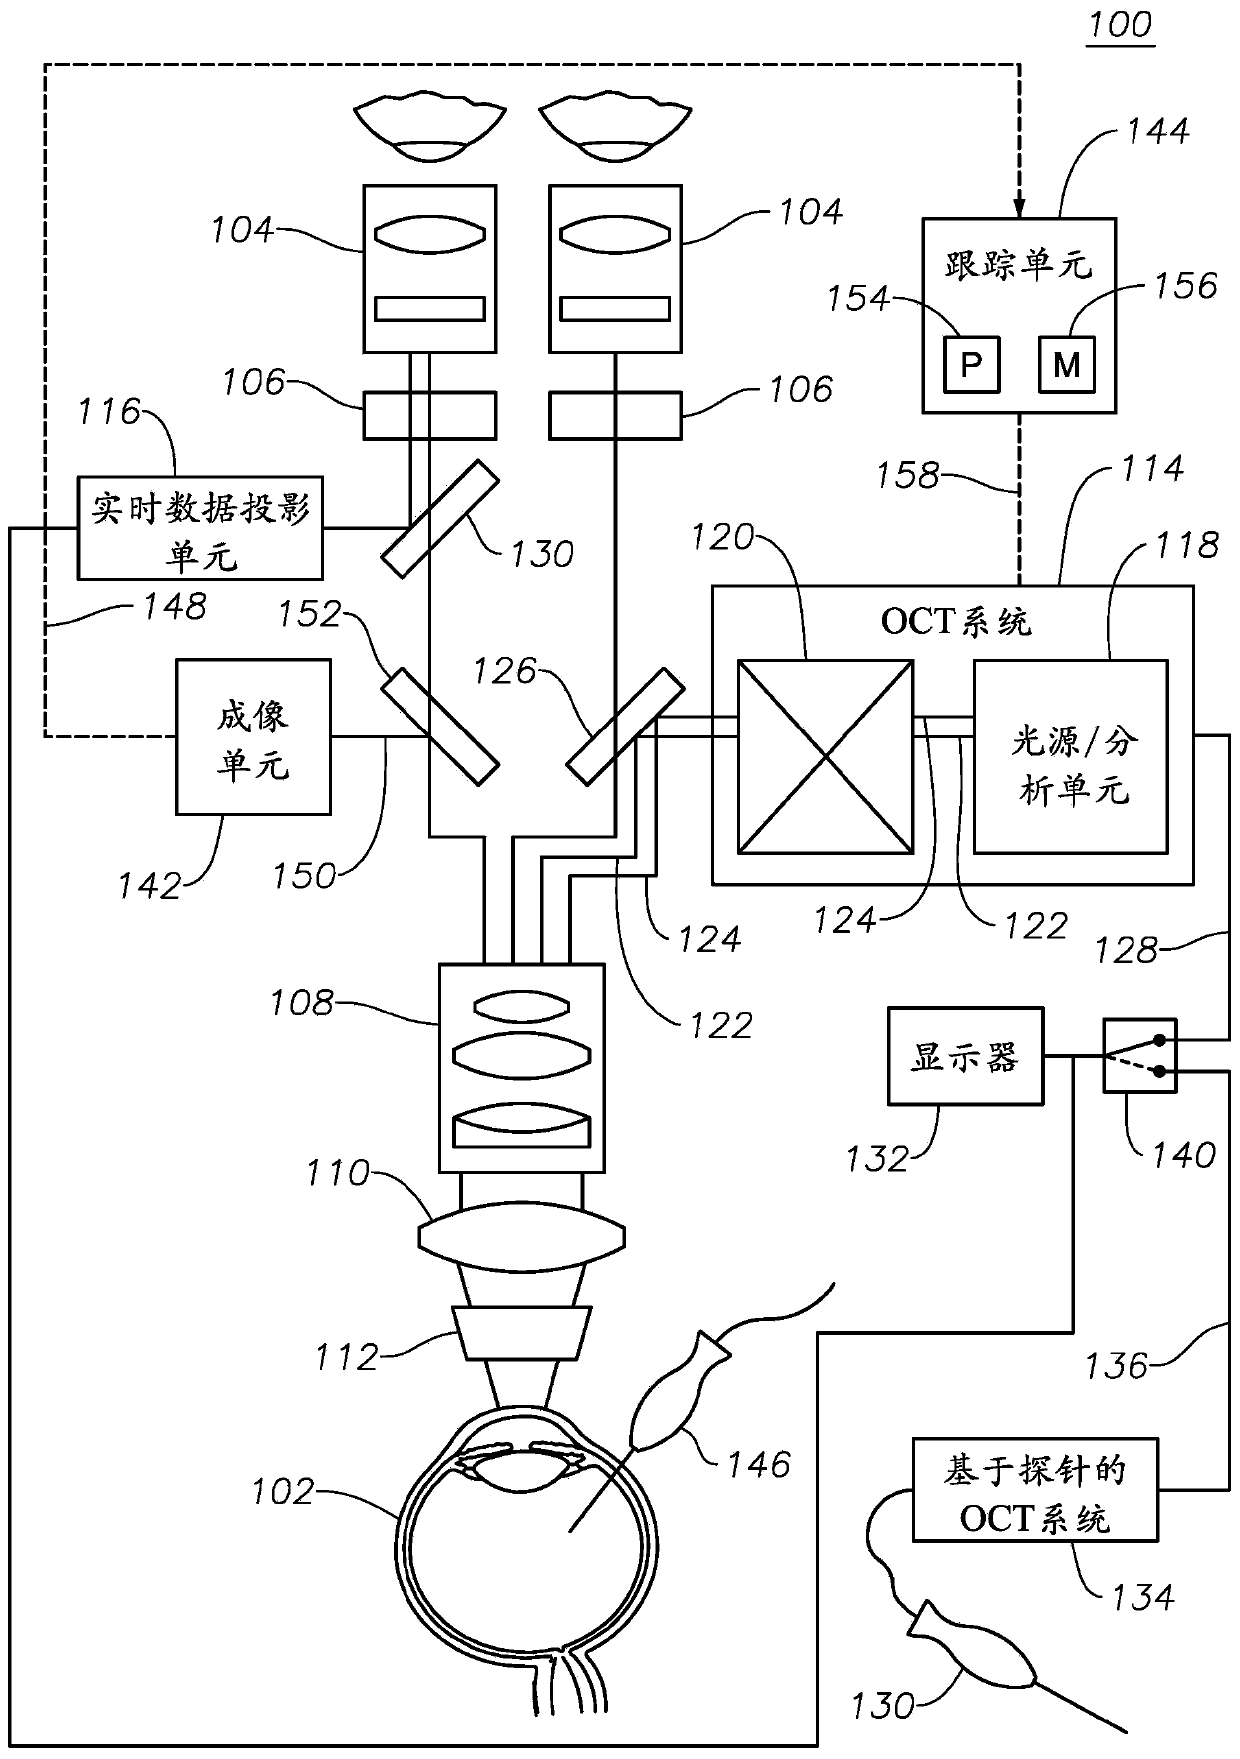 Surgical operating microscope with integrated optical coherence tomography and display system